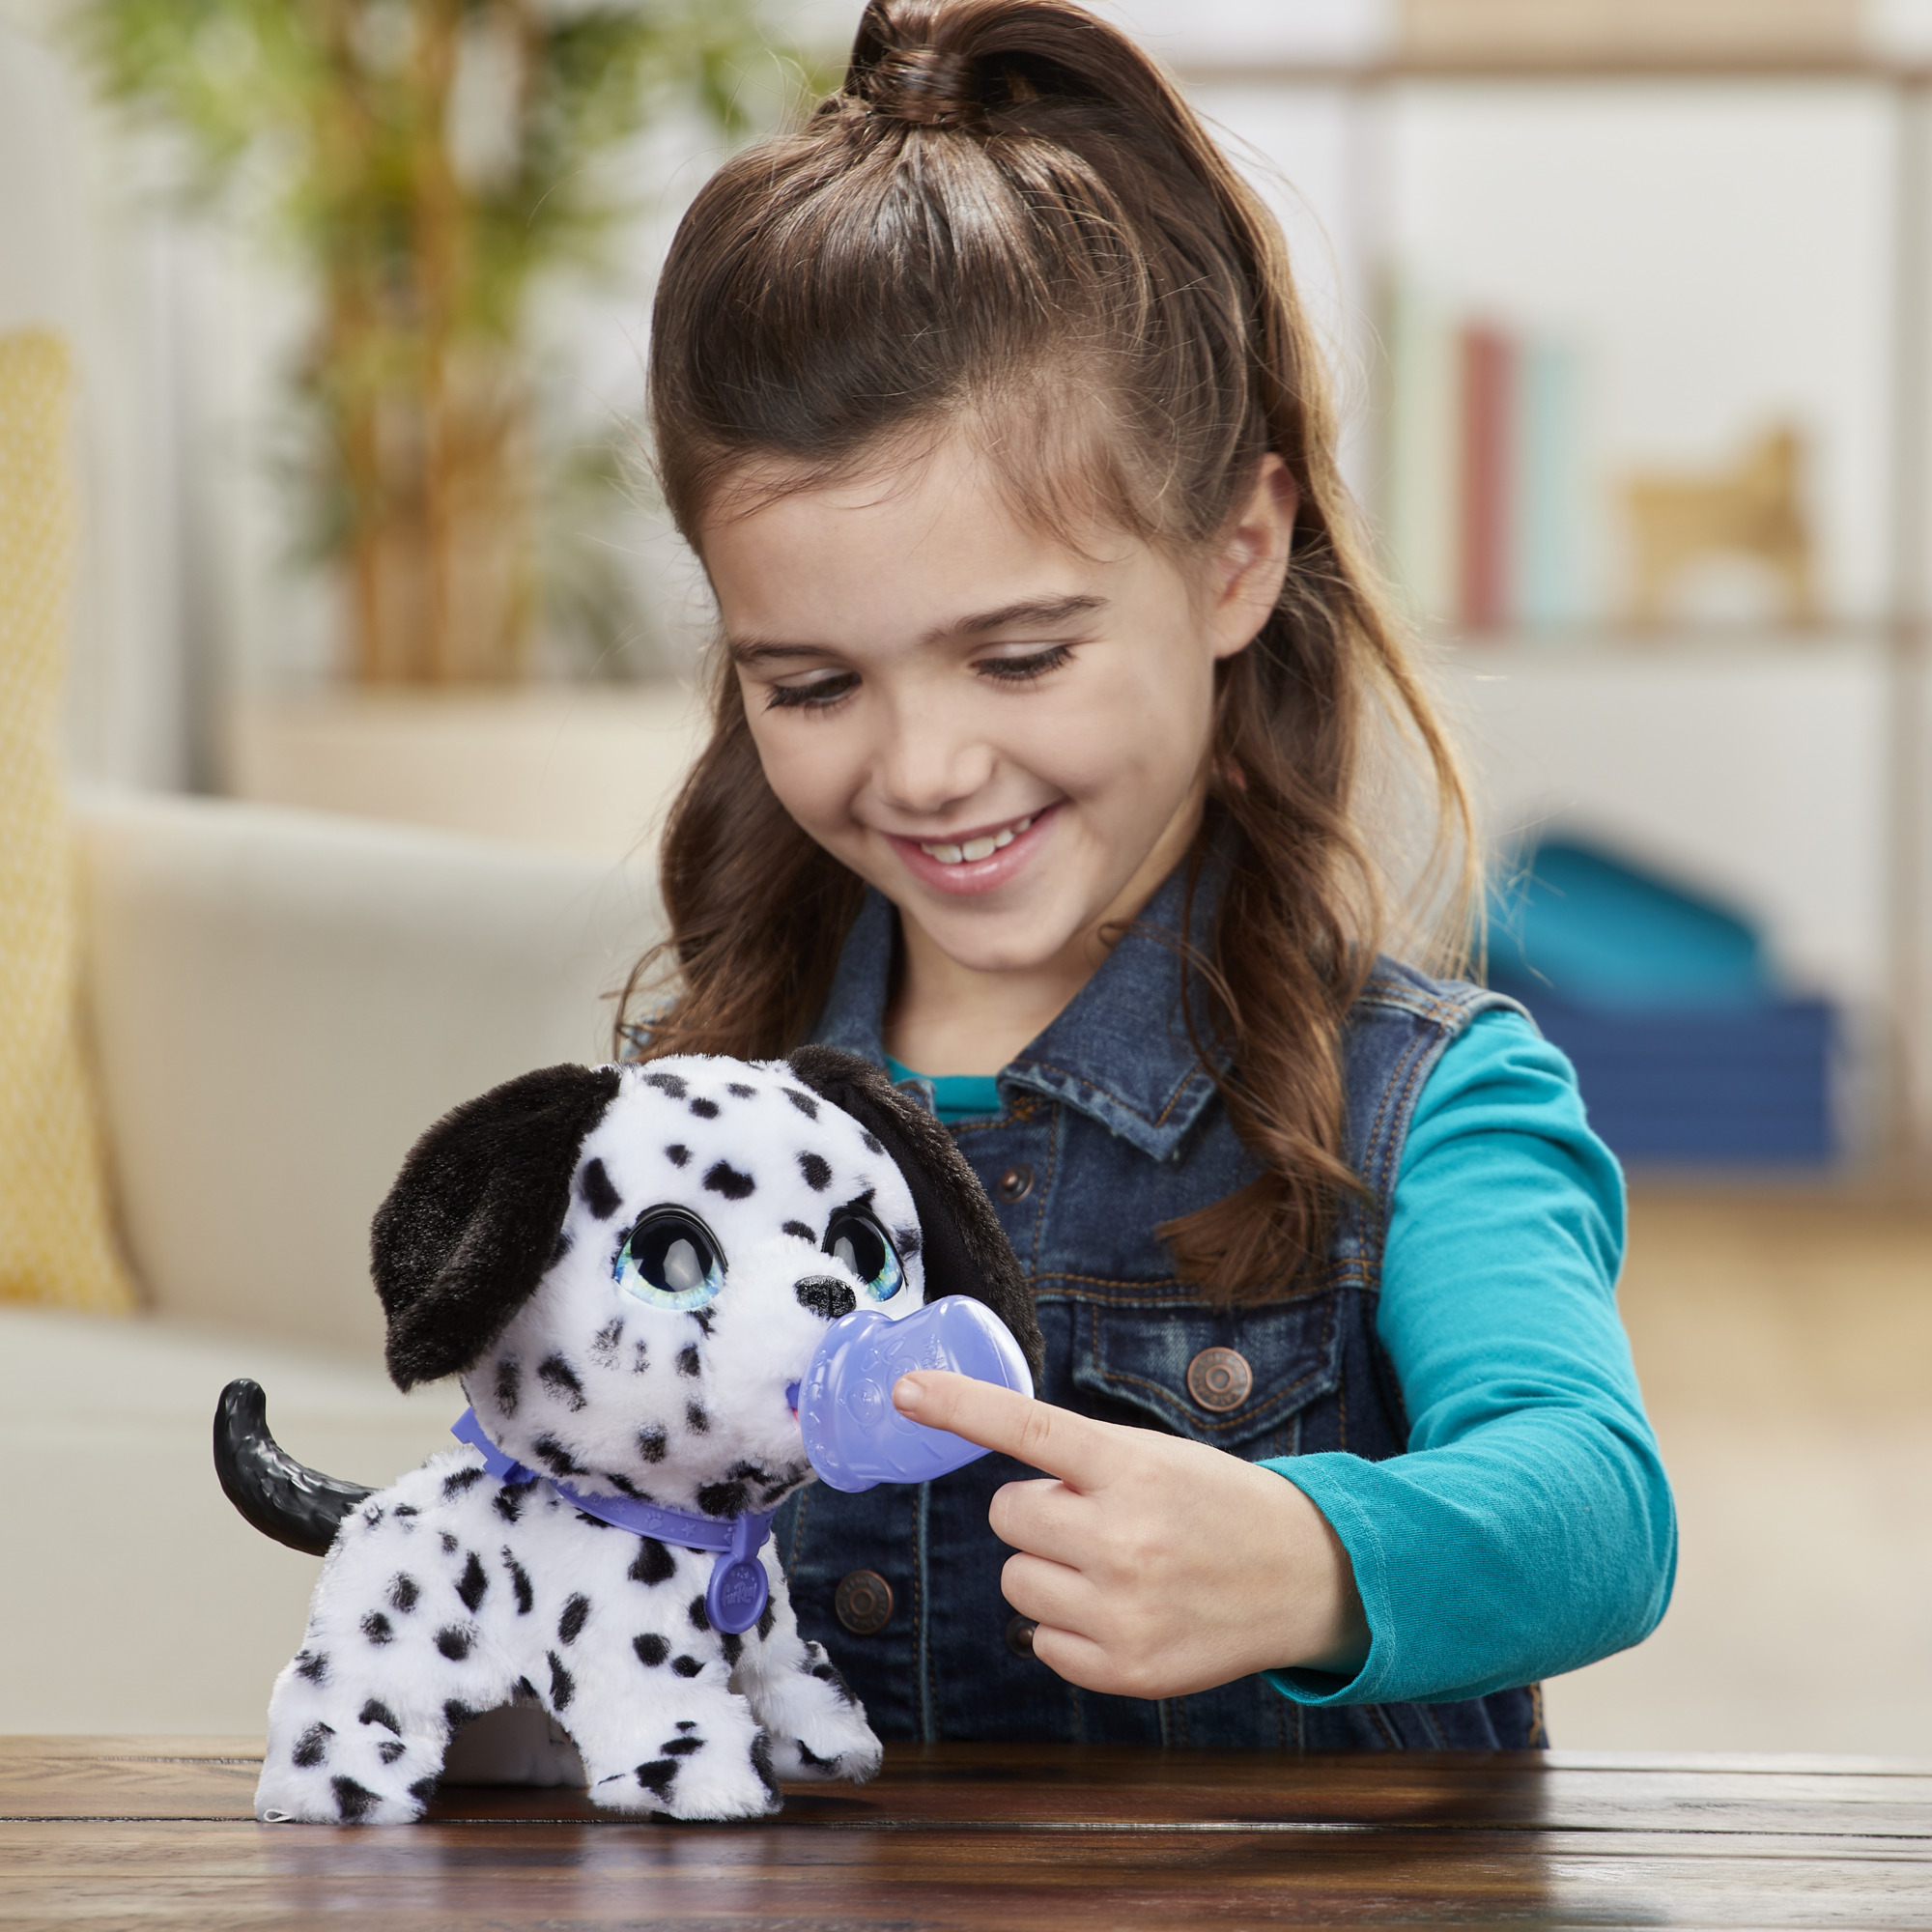 FurReal Poopalots Interactive Electronic Pet Dalmatian Kids Toy for Boys and Girls - image 3 of 8